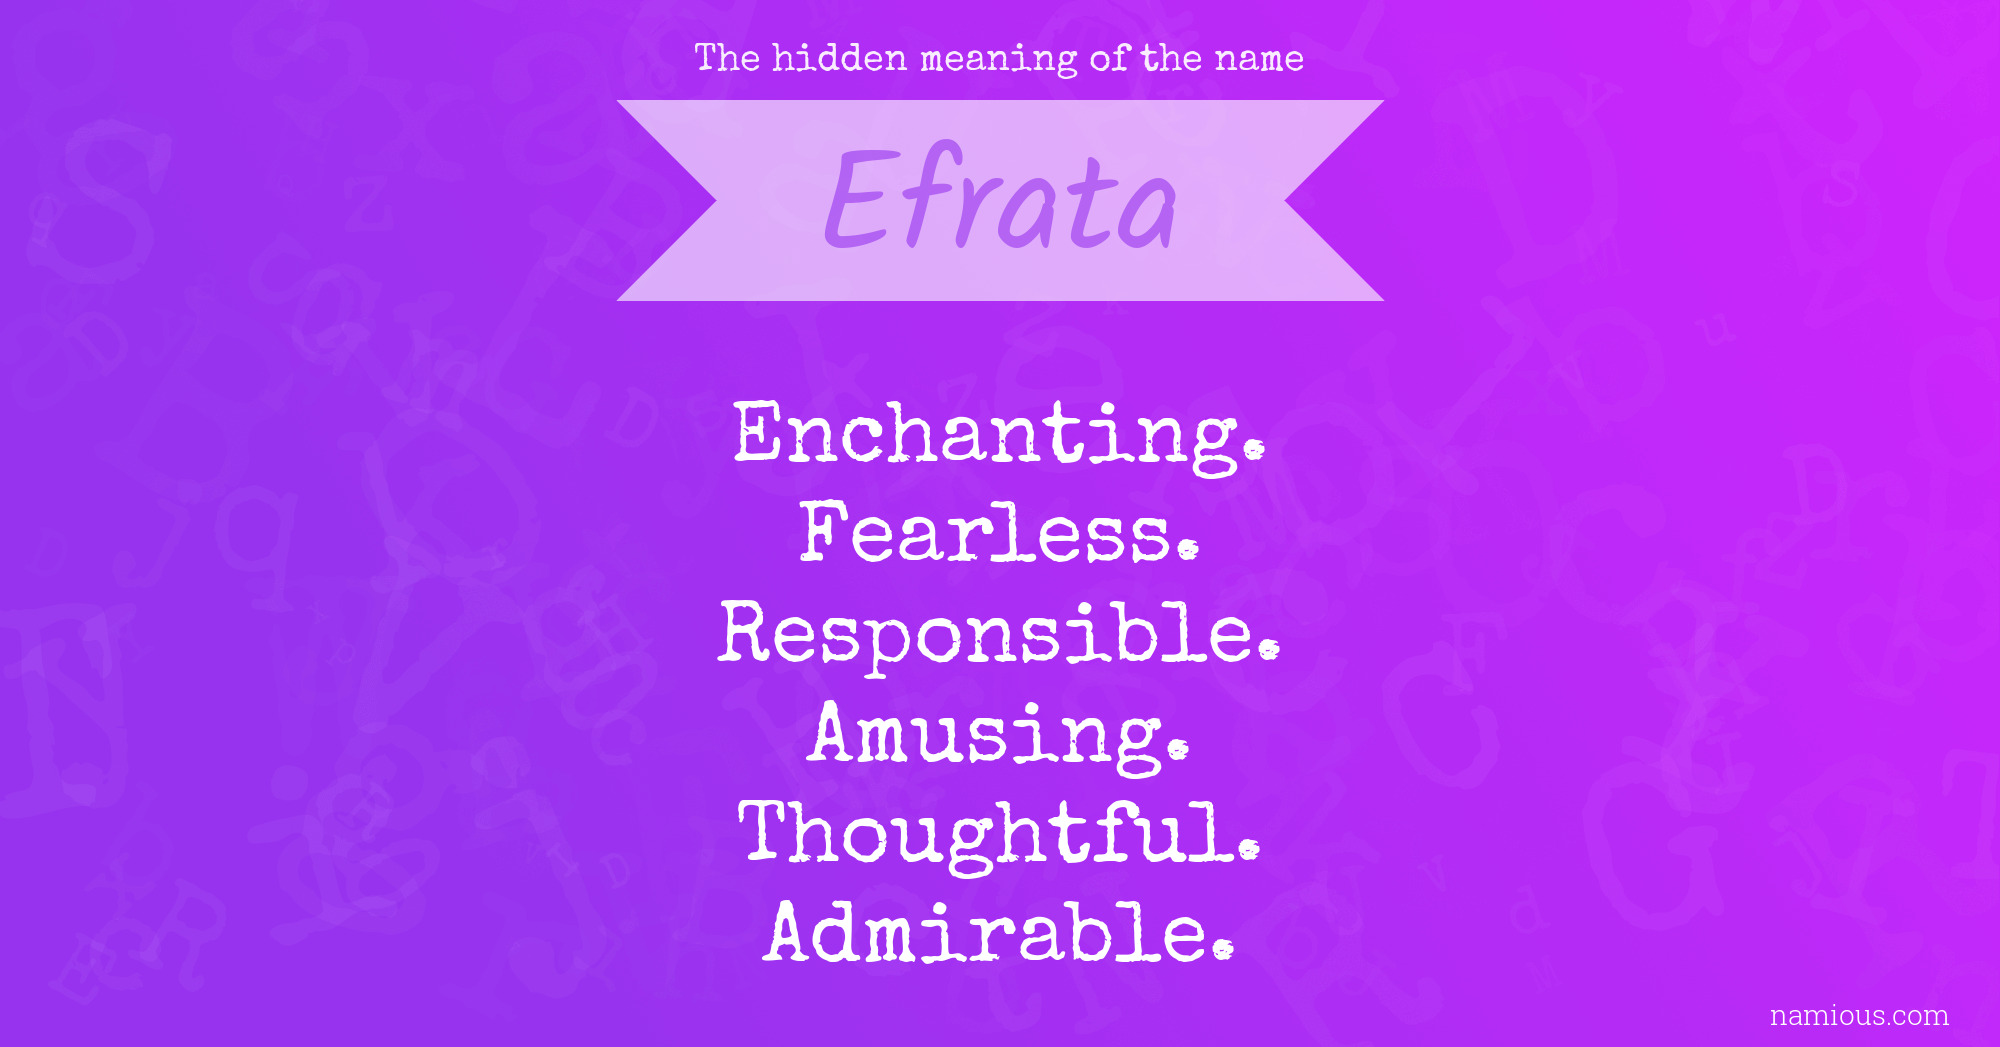 The hidden meaning of the name Efrata